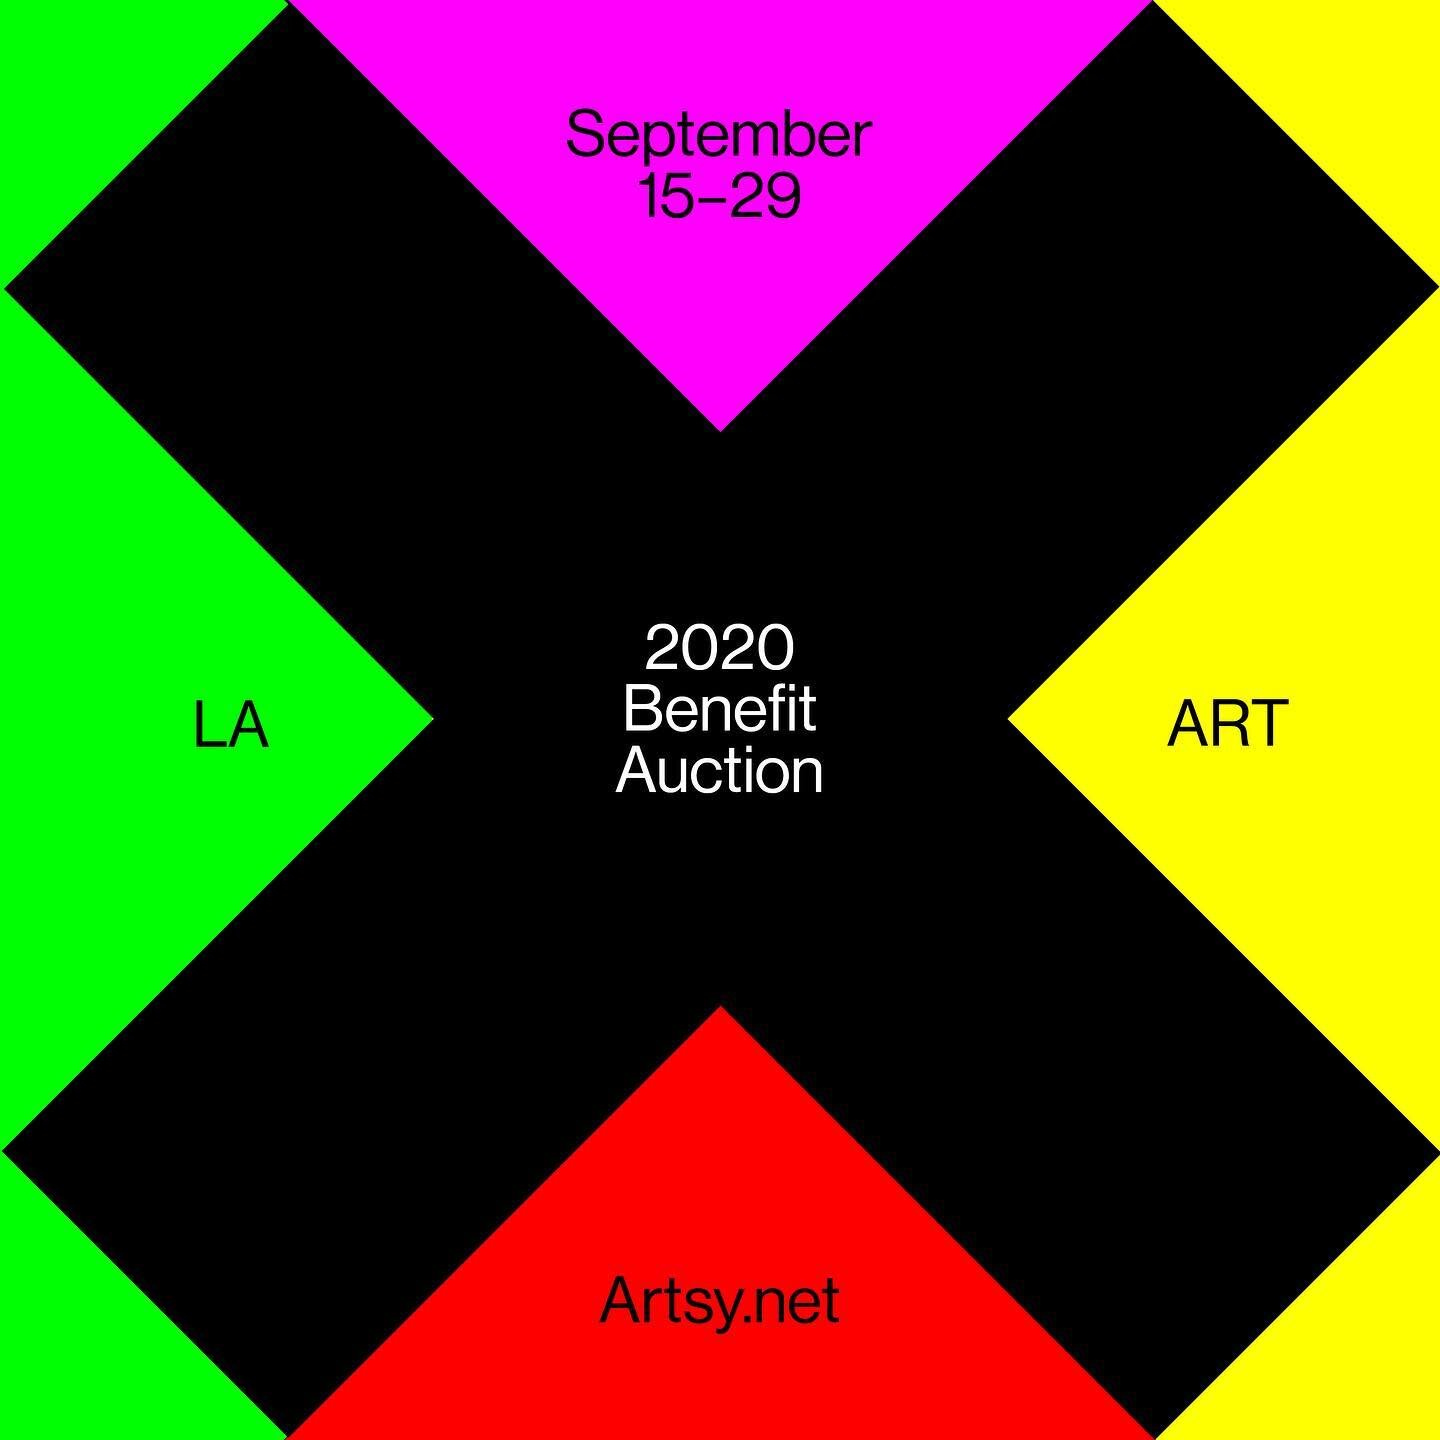 Launching on @artsy on Sept.15. Contact @laxart to preview works. Thank you to all the artists who support us!!

Artsy.net/laxart